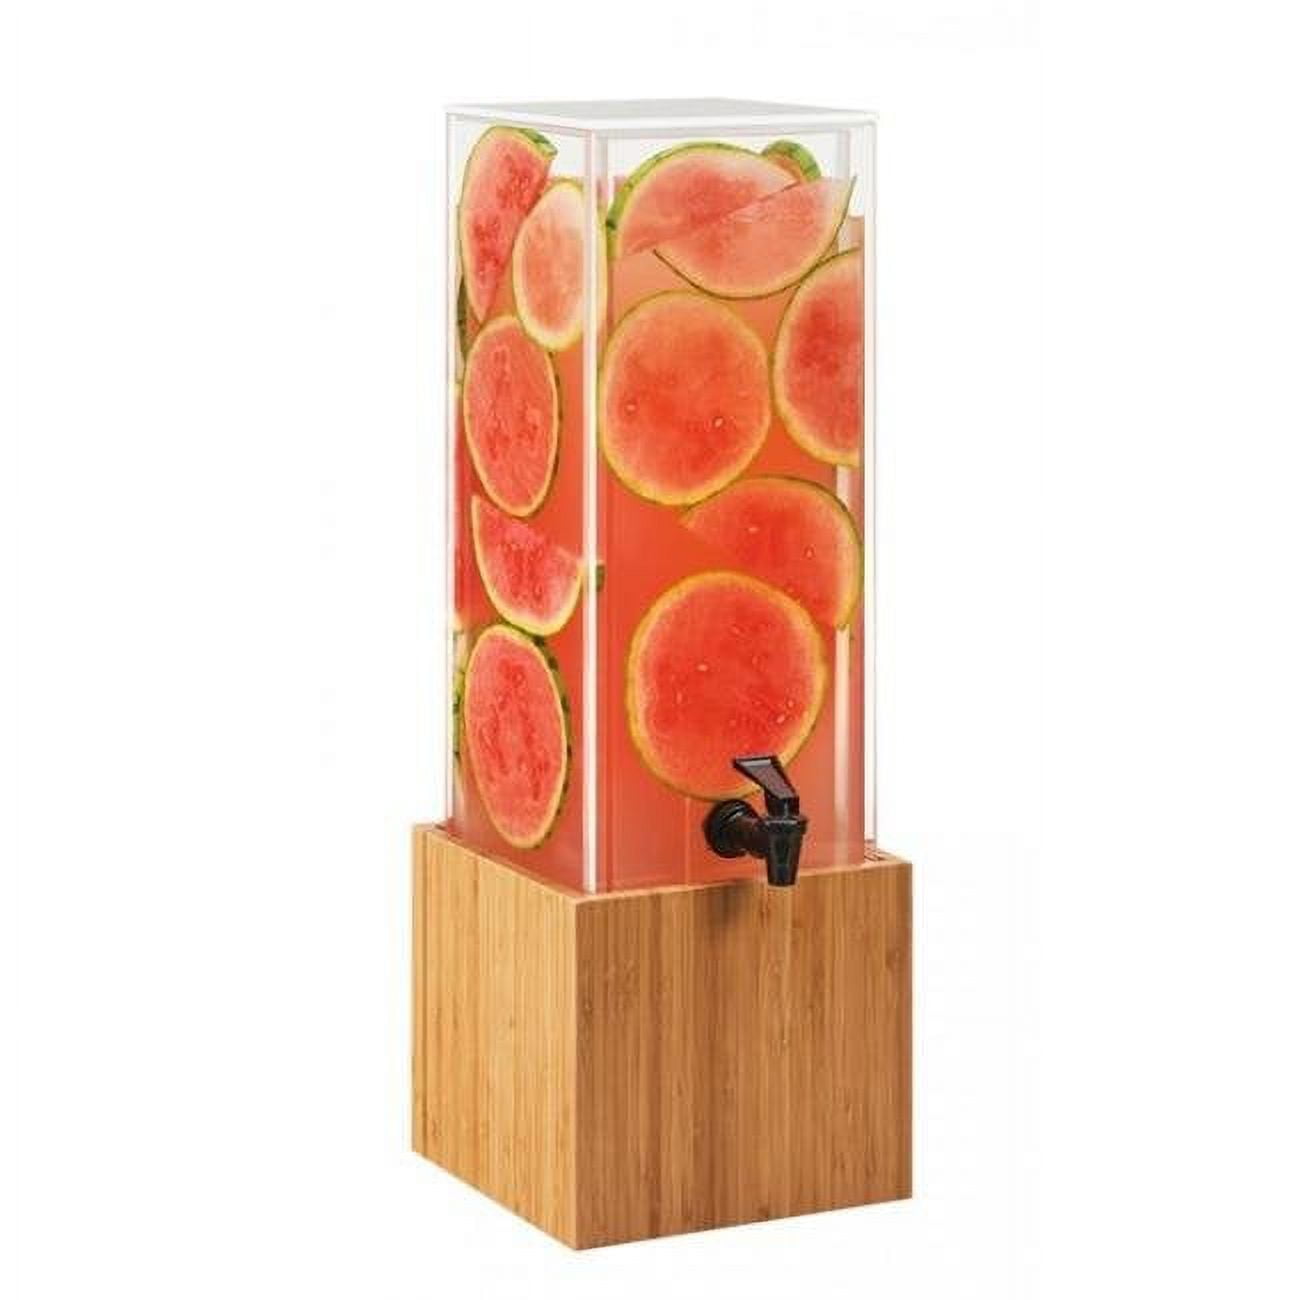 Chef 5 Min Meals Bamboo 3 gal Beverage Dispenser with Decorative Wall - 8.125 x 9.75 x 25.75 in.